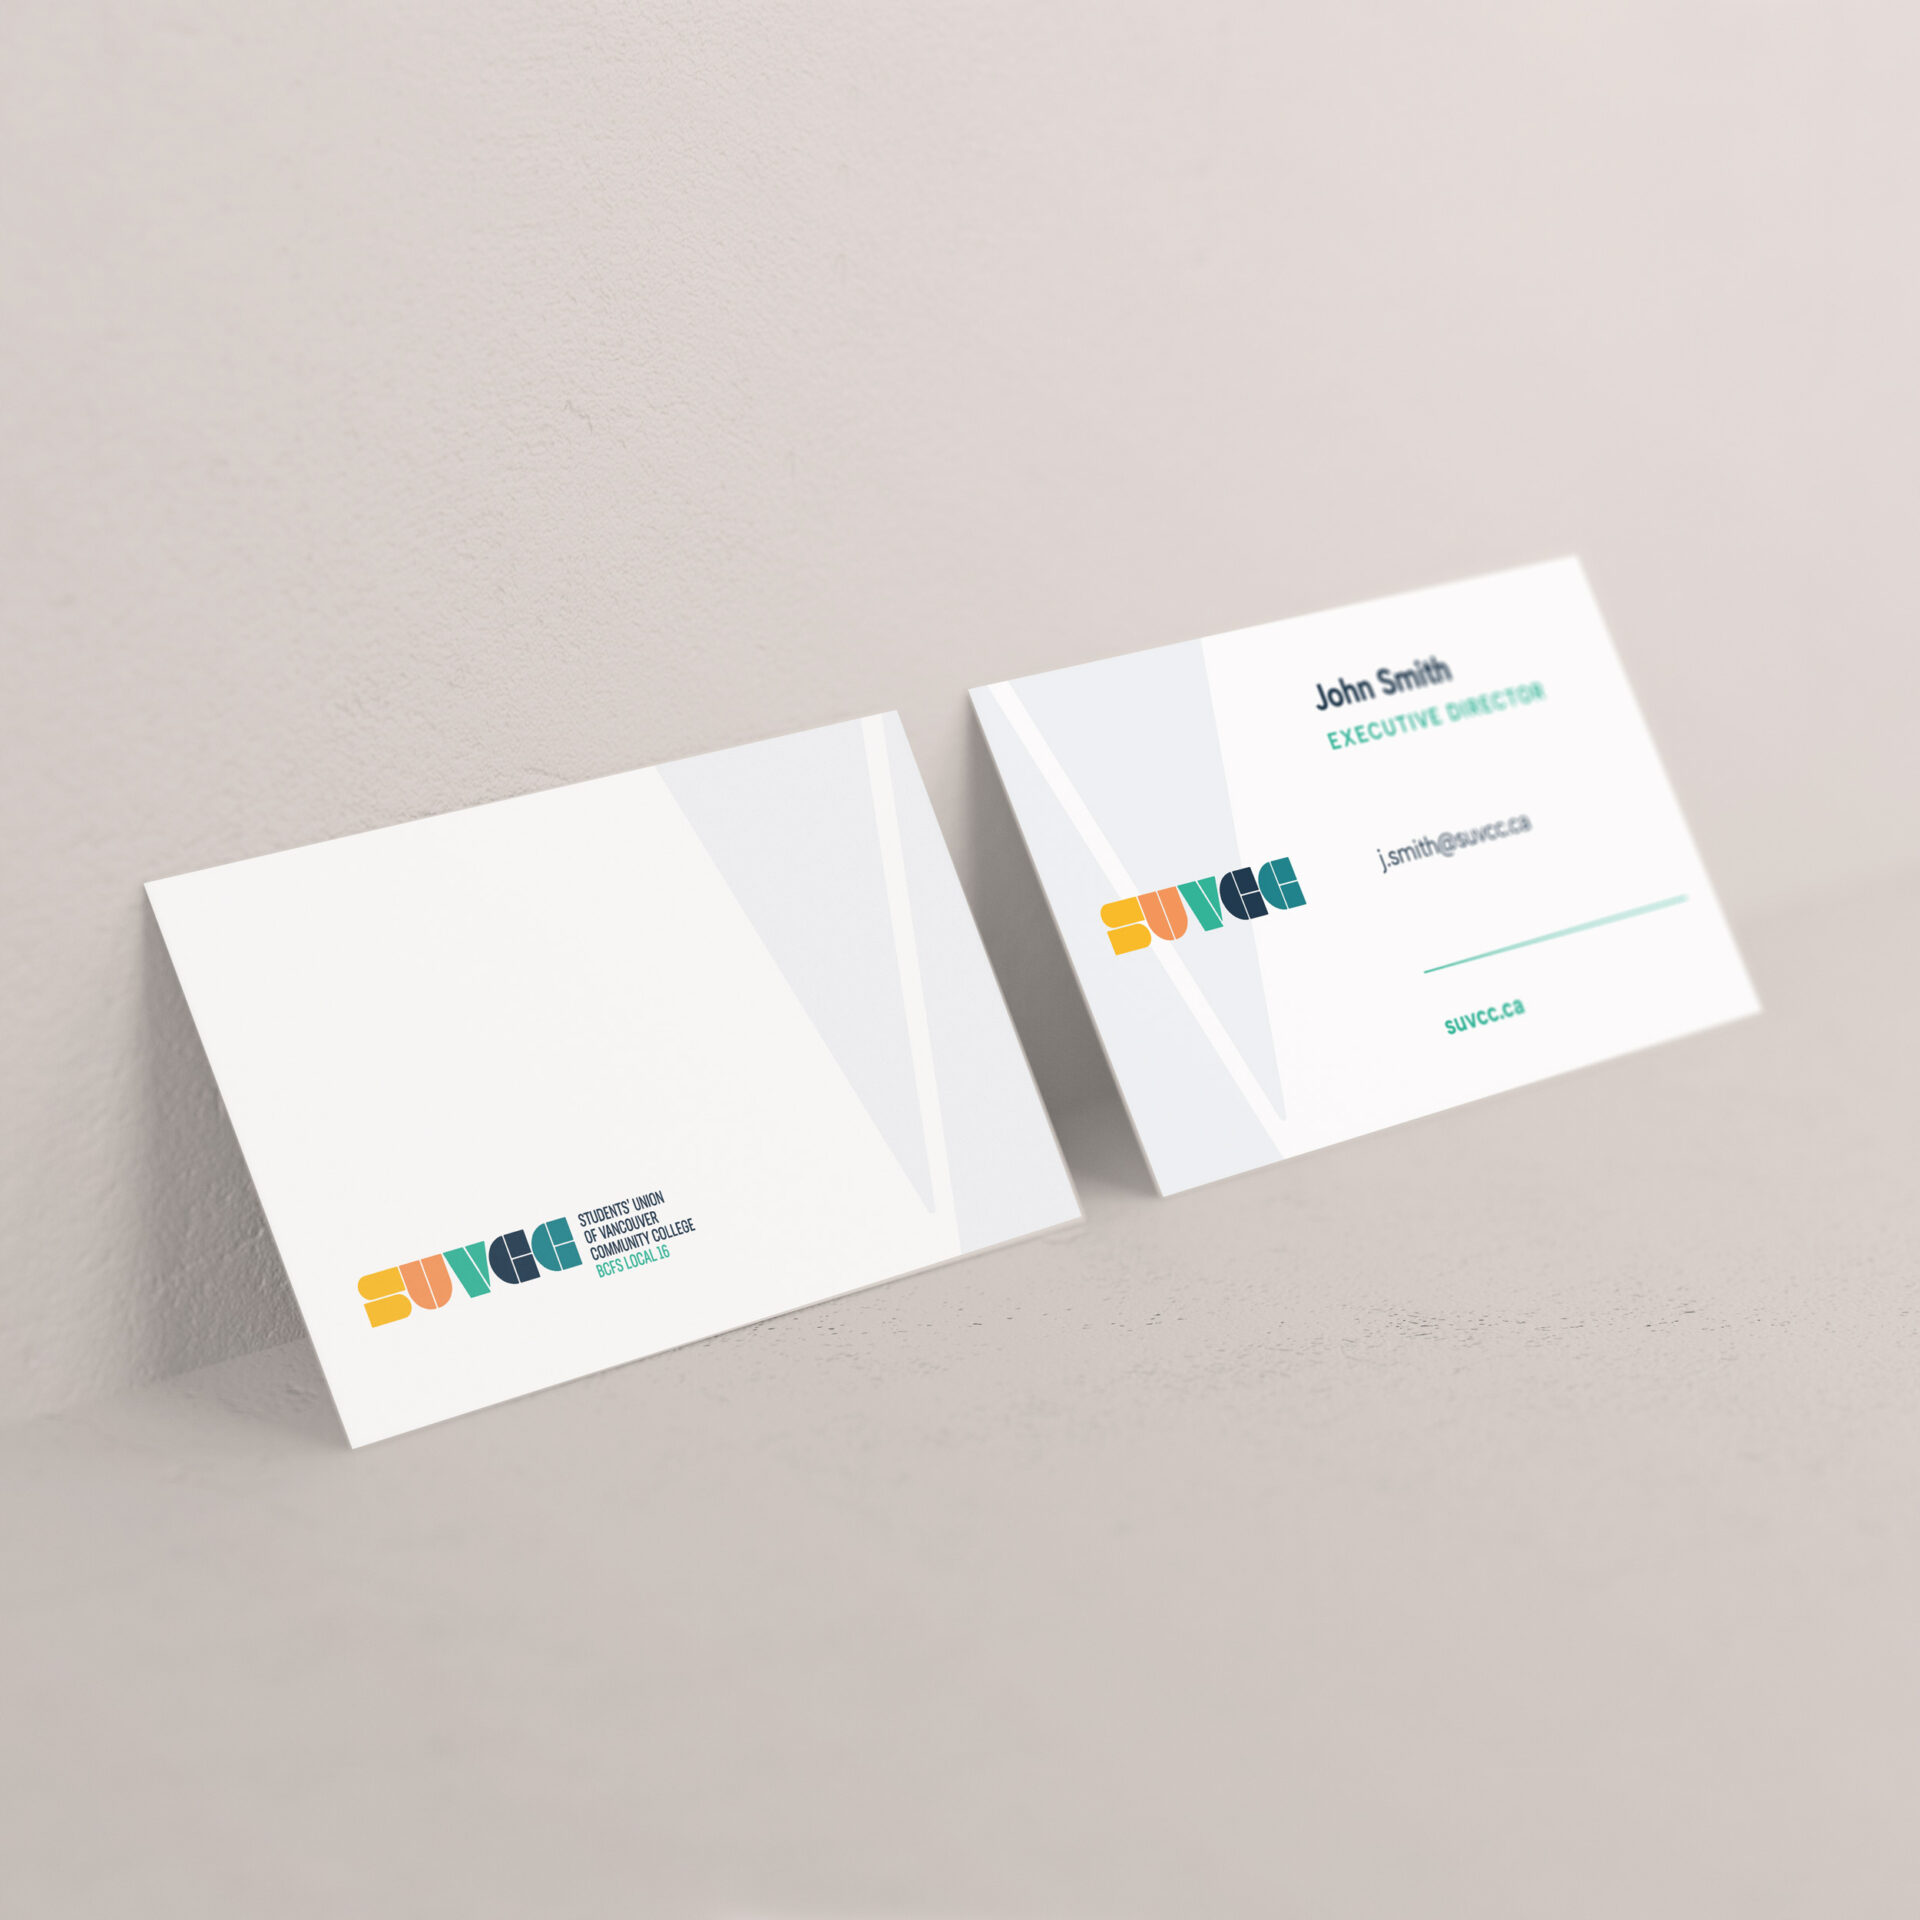 Studiothink is a Vancouver Branding and Web Design Company